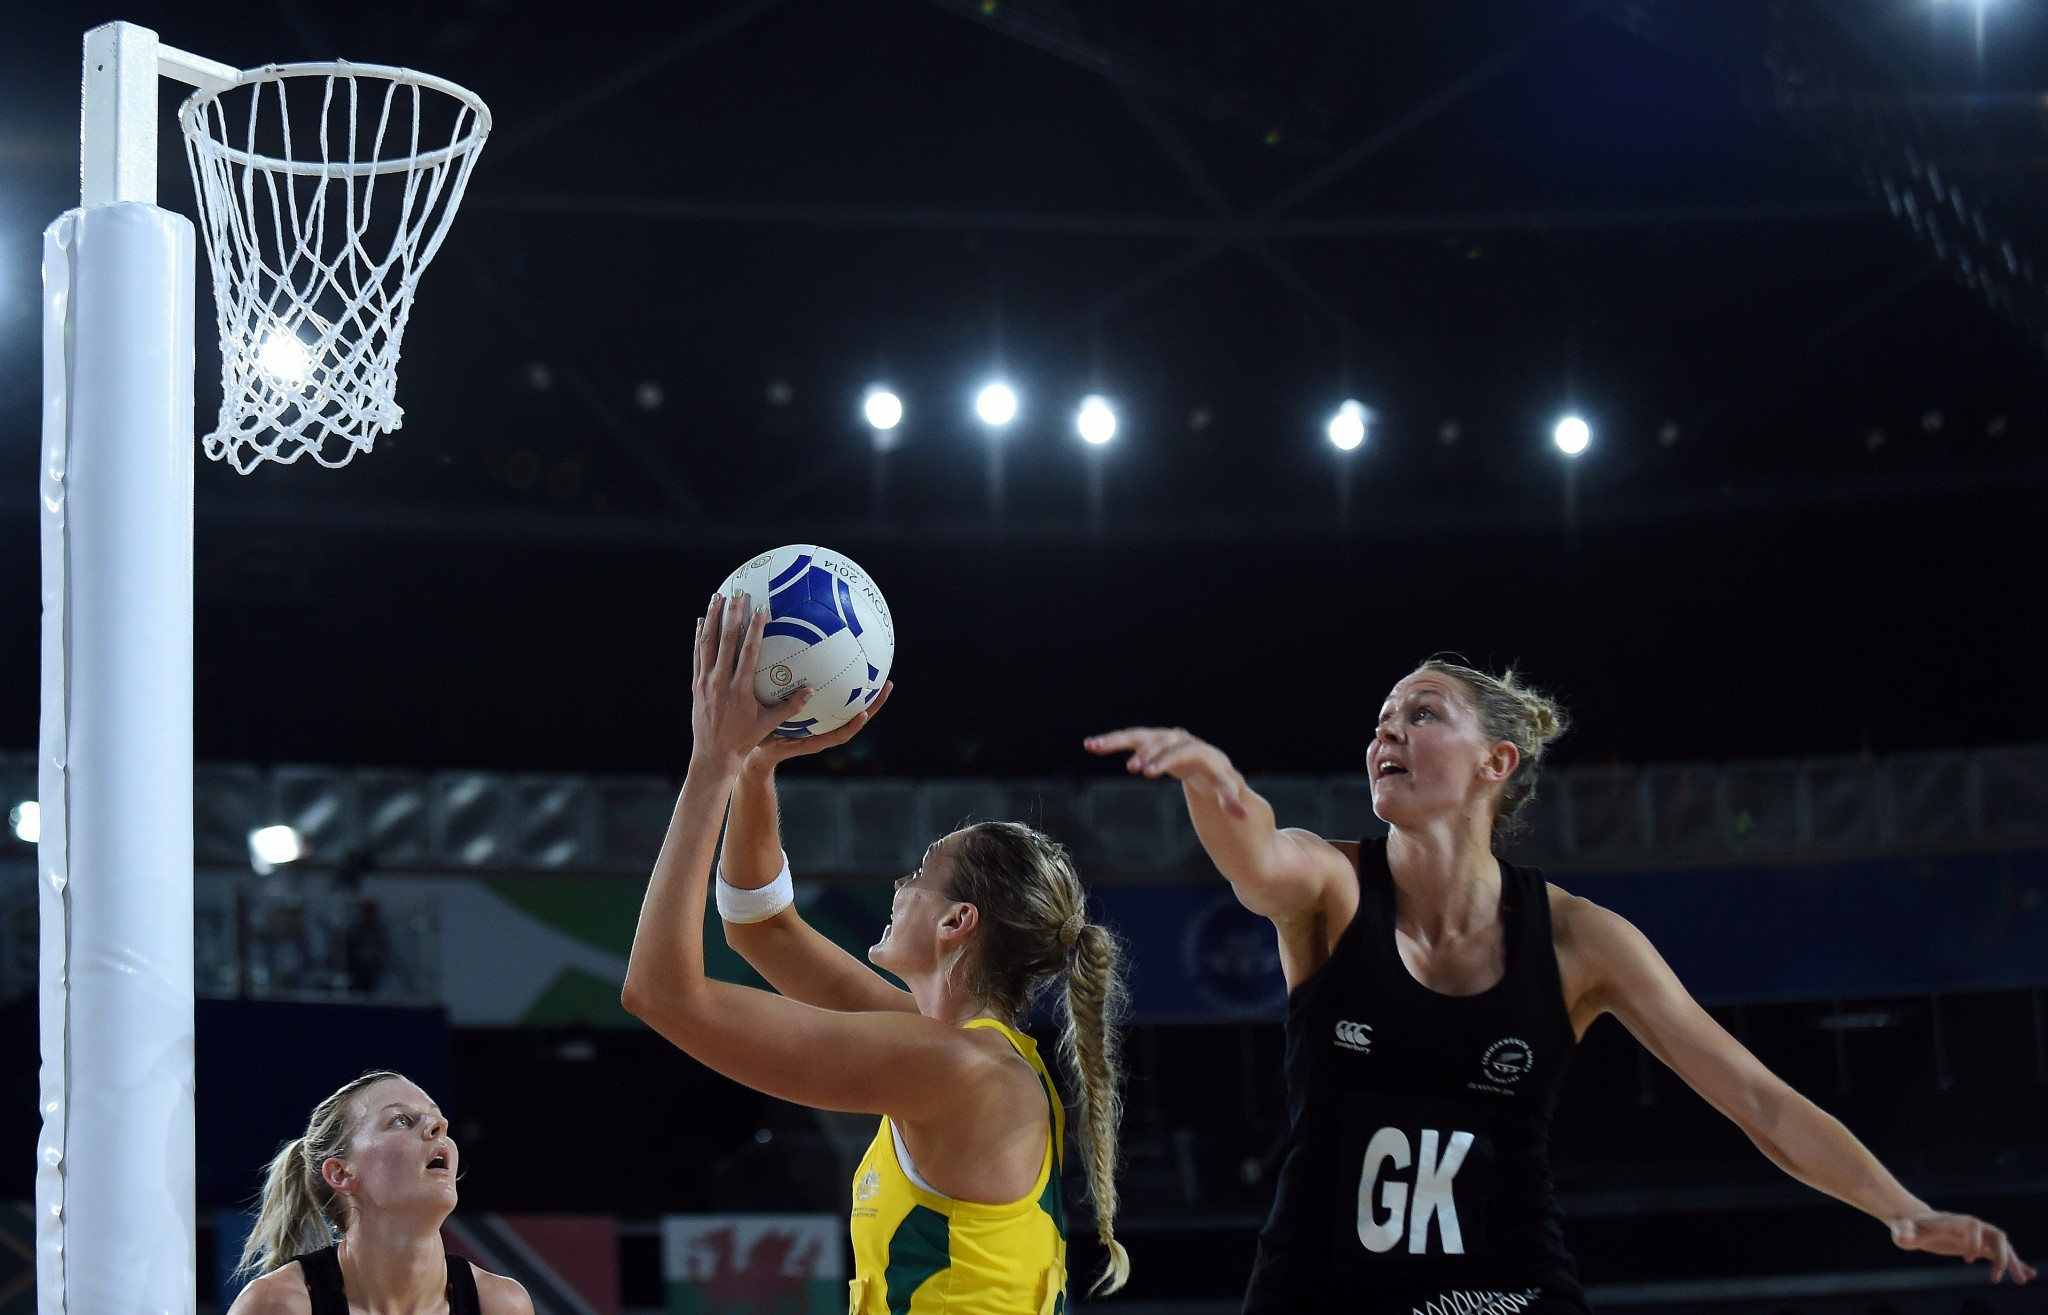 The 12 teams will be split into two groups of six teams at the Gold Coast 2018 netball competition ©Getty Images